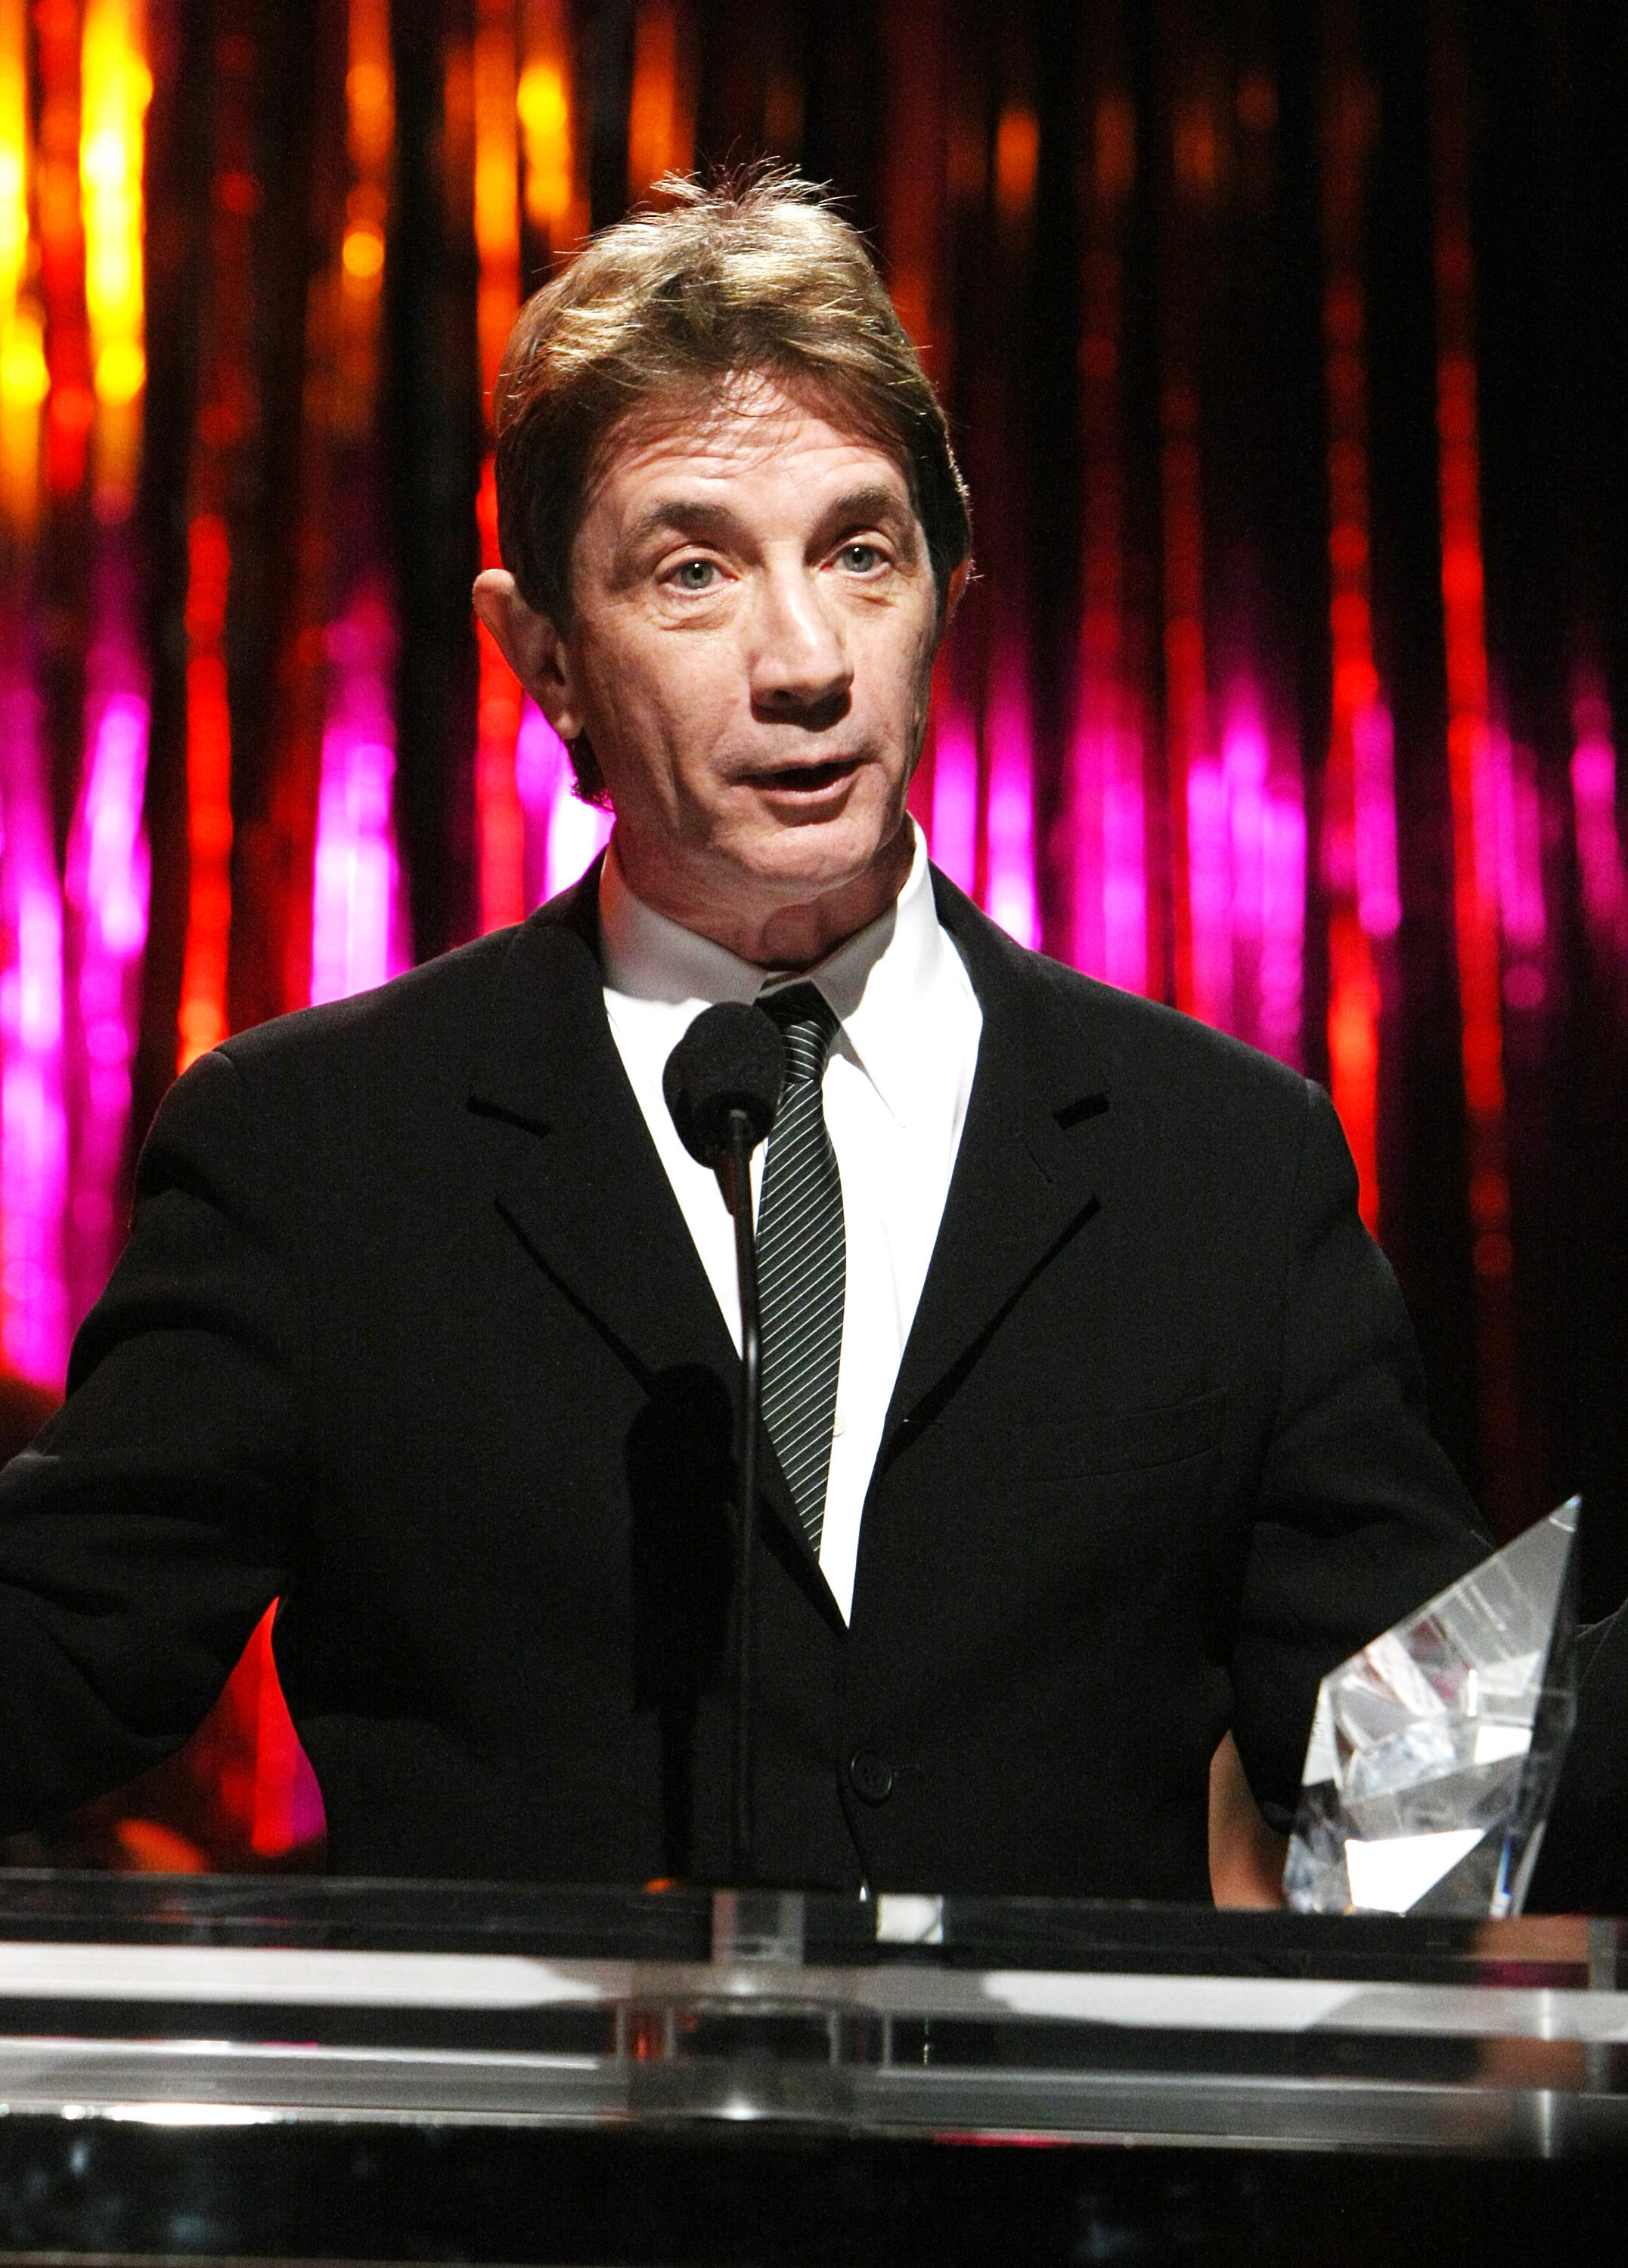 Martin Short accepts the Courage Award on behalf of late wife Nancy Dolman onstage at the 14th annual Unforgettable Evening benefiting EIFs WCRF held in Beverly Hills, California, on February 10, 2011. | Source: Getty Images